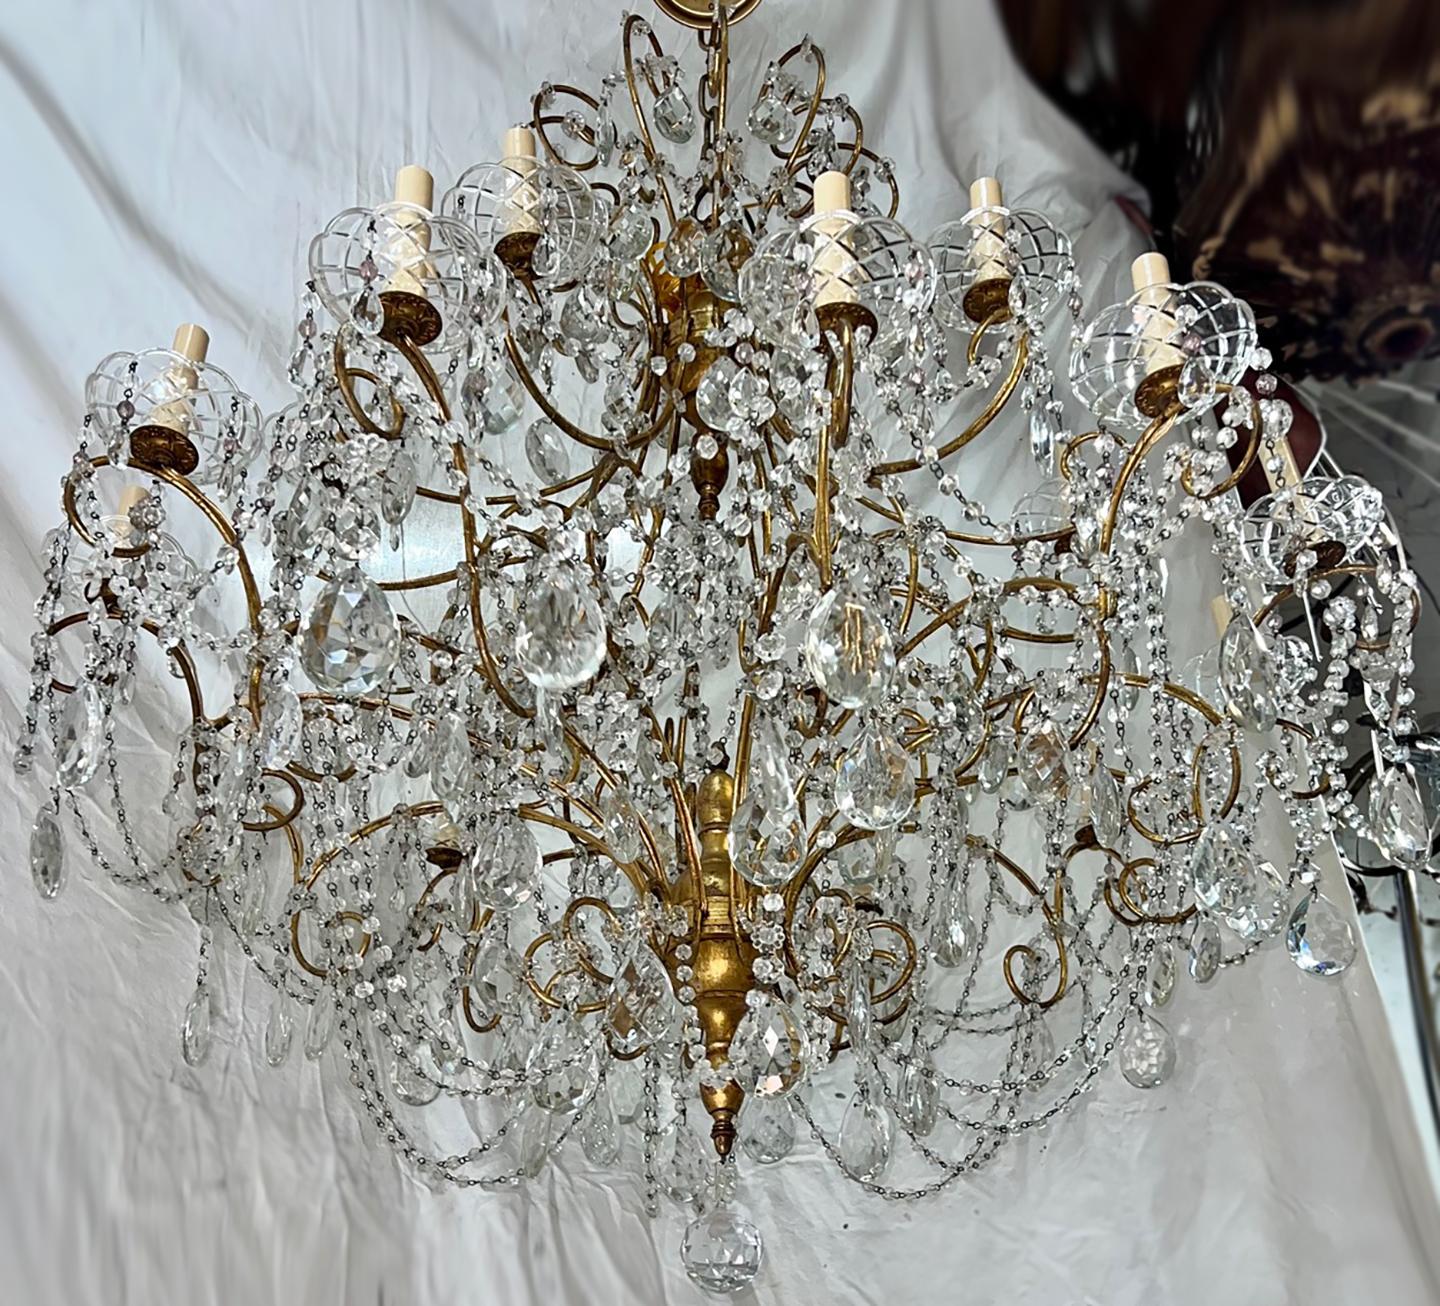 A circa 1920's Italian chandelier with crystal pendants and 18 candelabra lights.

Measurements:
Height: 36